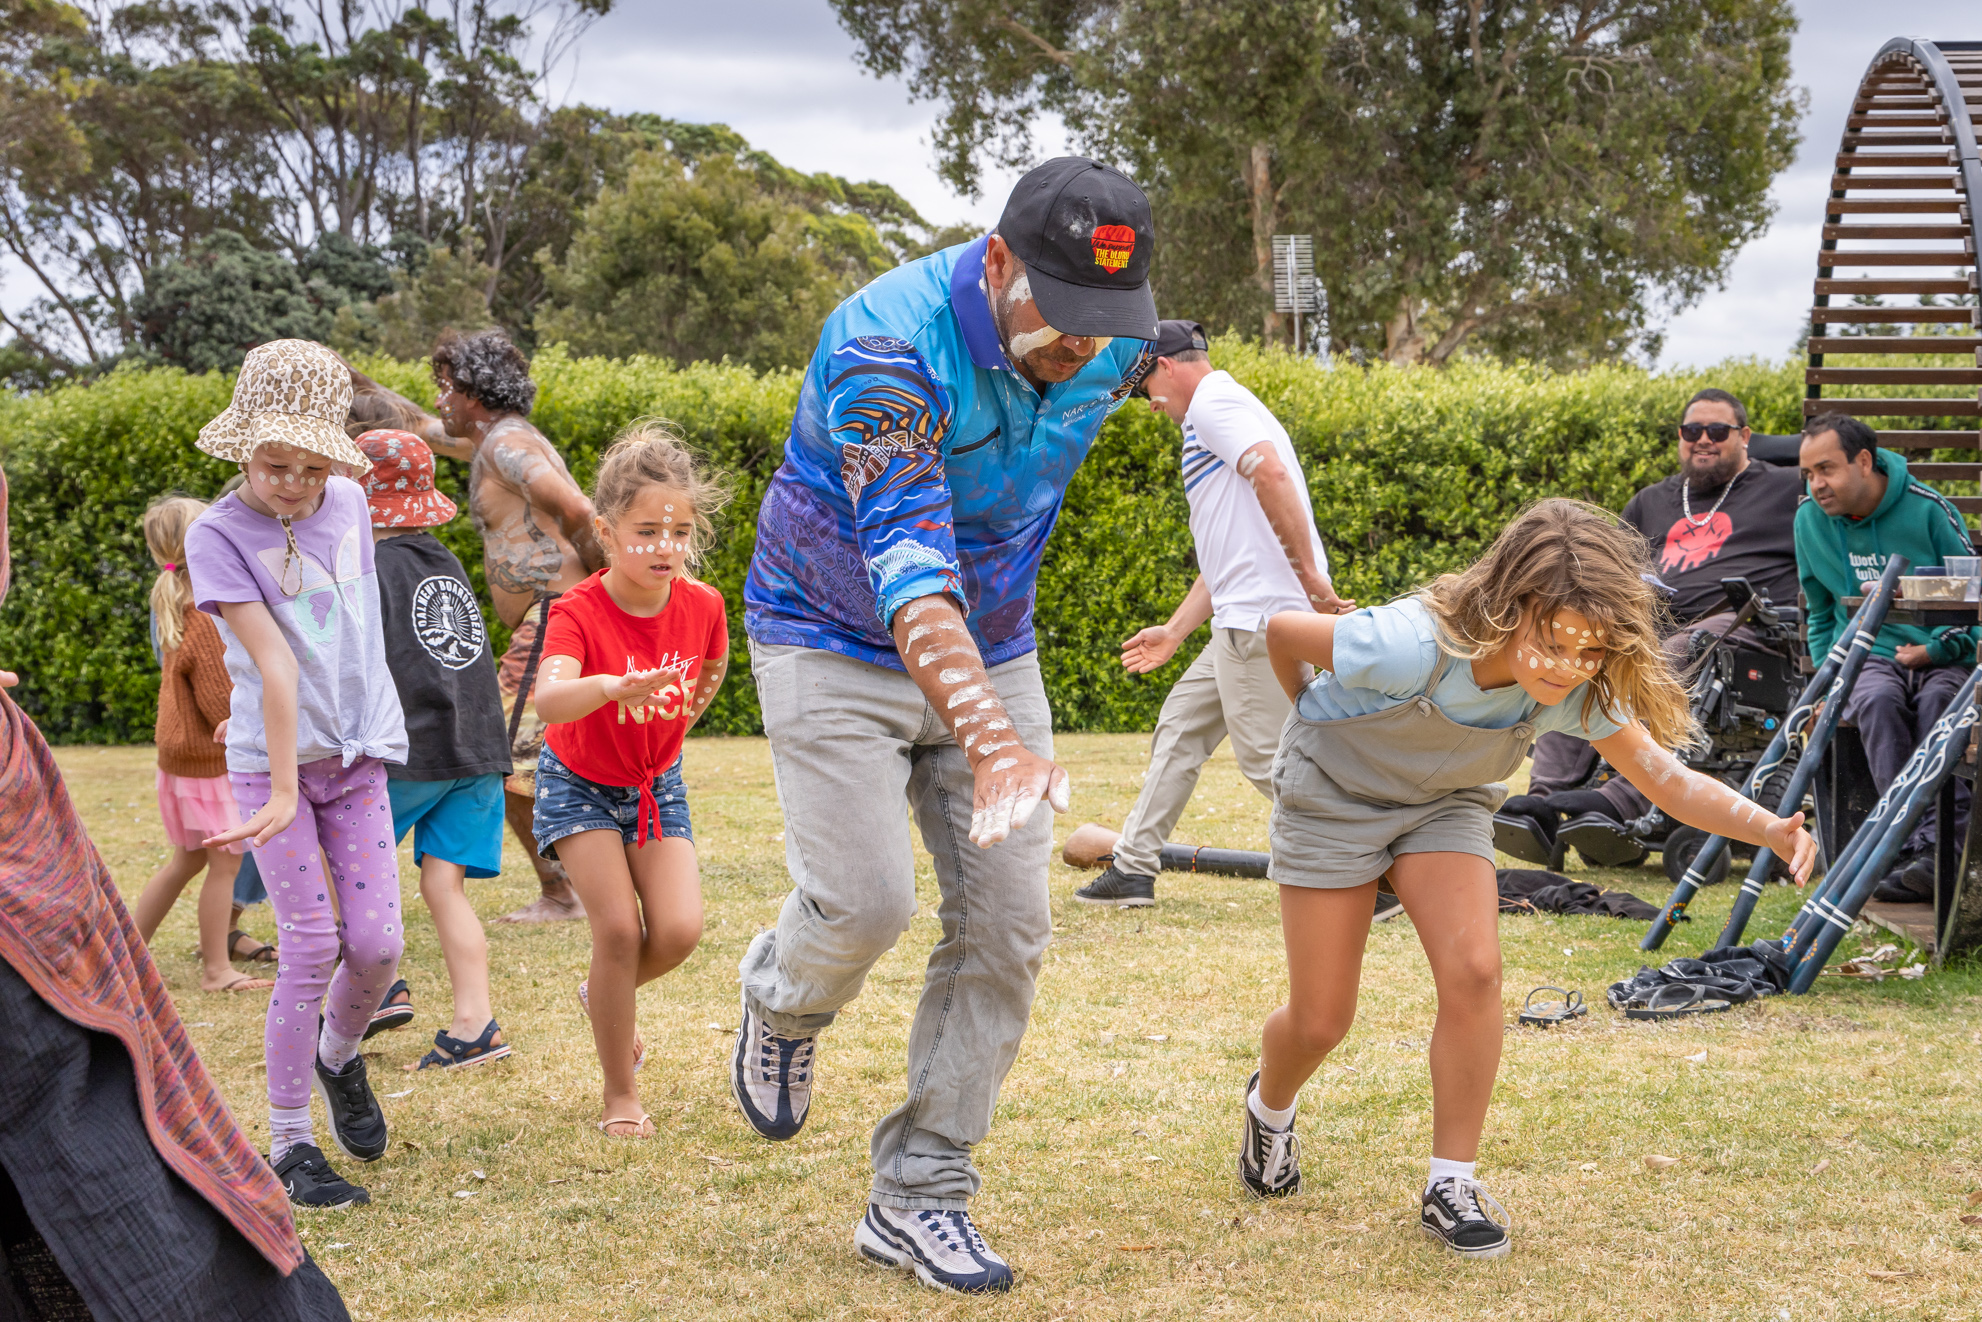 DIDGERIDOO AND DANCE WORKSHOP/PERFORMANCE WITH NIGEL STEWART OF BUNITCH DREAMING - All welcome for this incredible performance. Bring the kids.